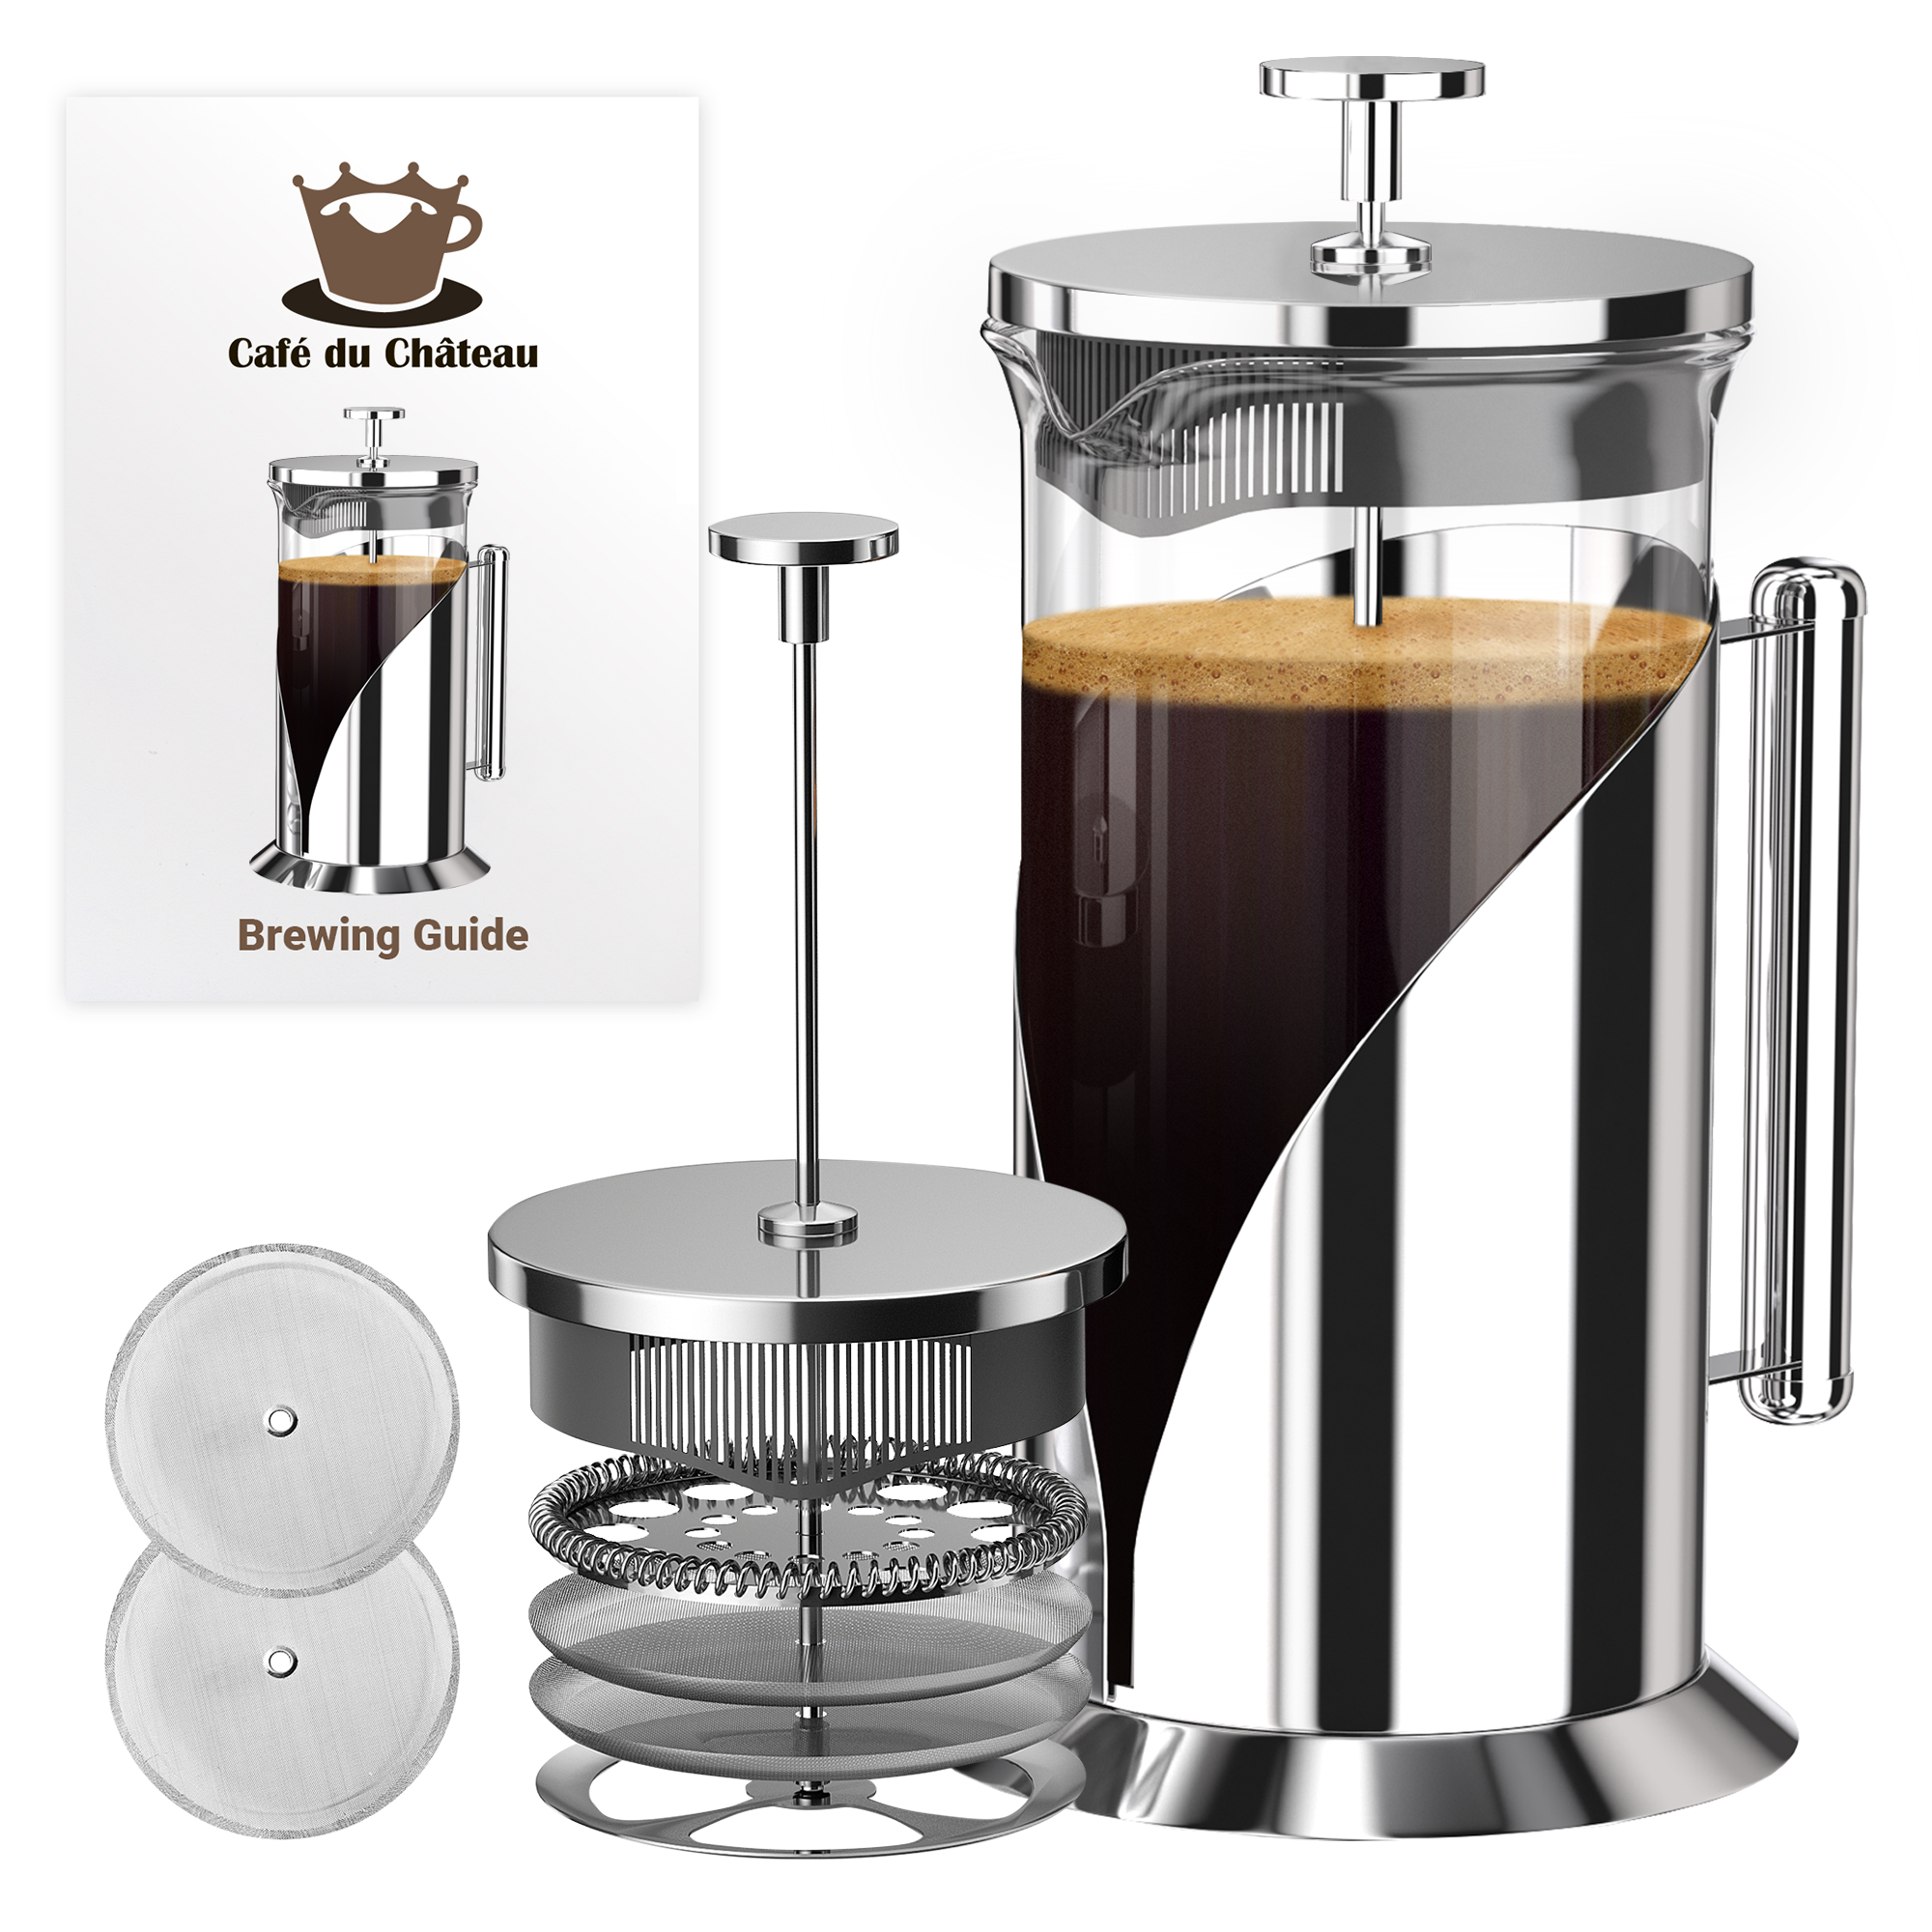 Belwares Stainless Steel French Coffee Press, with Double Wall and Extra Filters - 50 oz